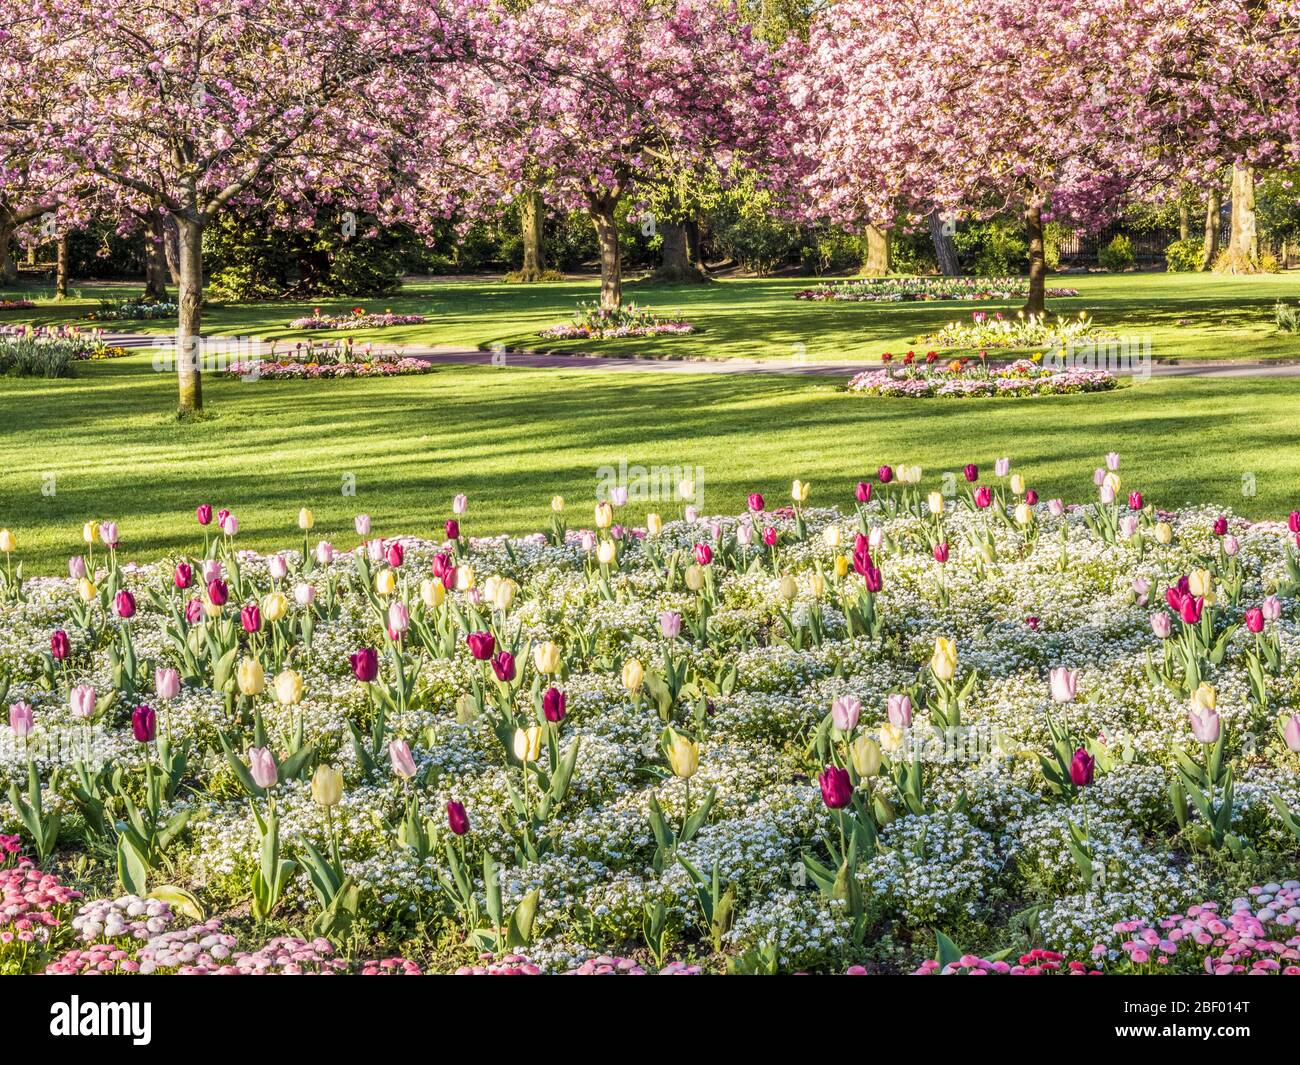 A Bed Of Tulips White Alyssum And Pink Bellis Daisies With Flowering Pink Cherry Trees In The Background In An Urban Public Park In England Stock Photo Alamy